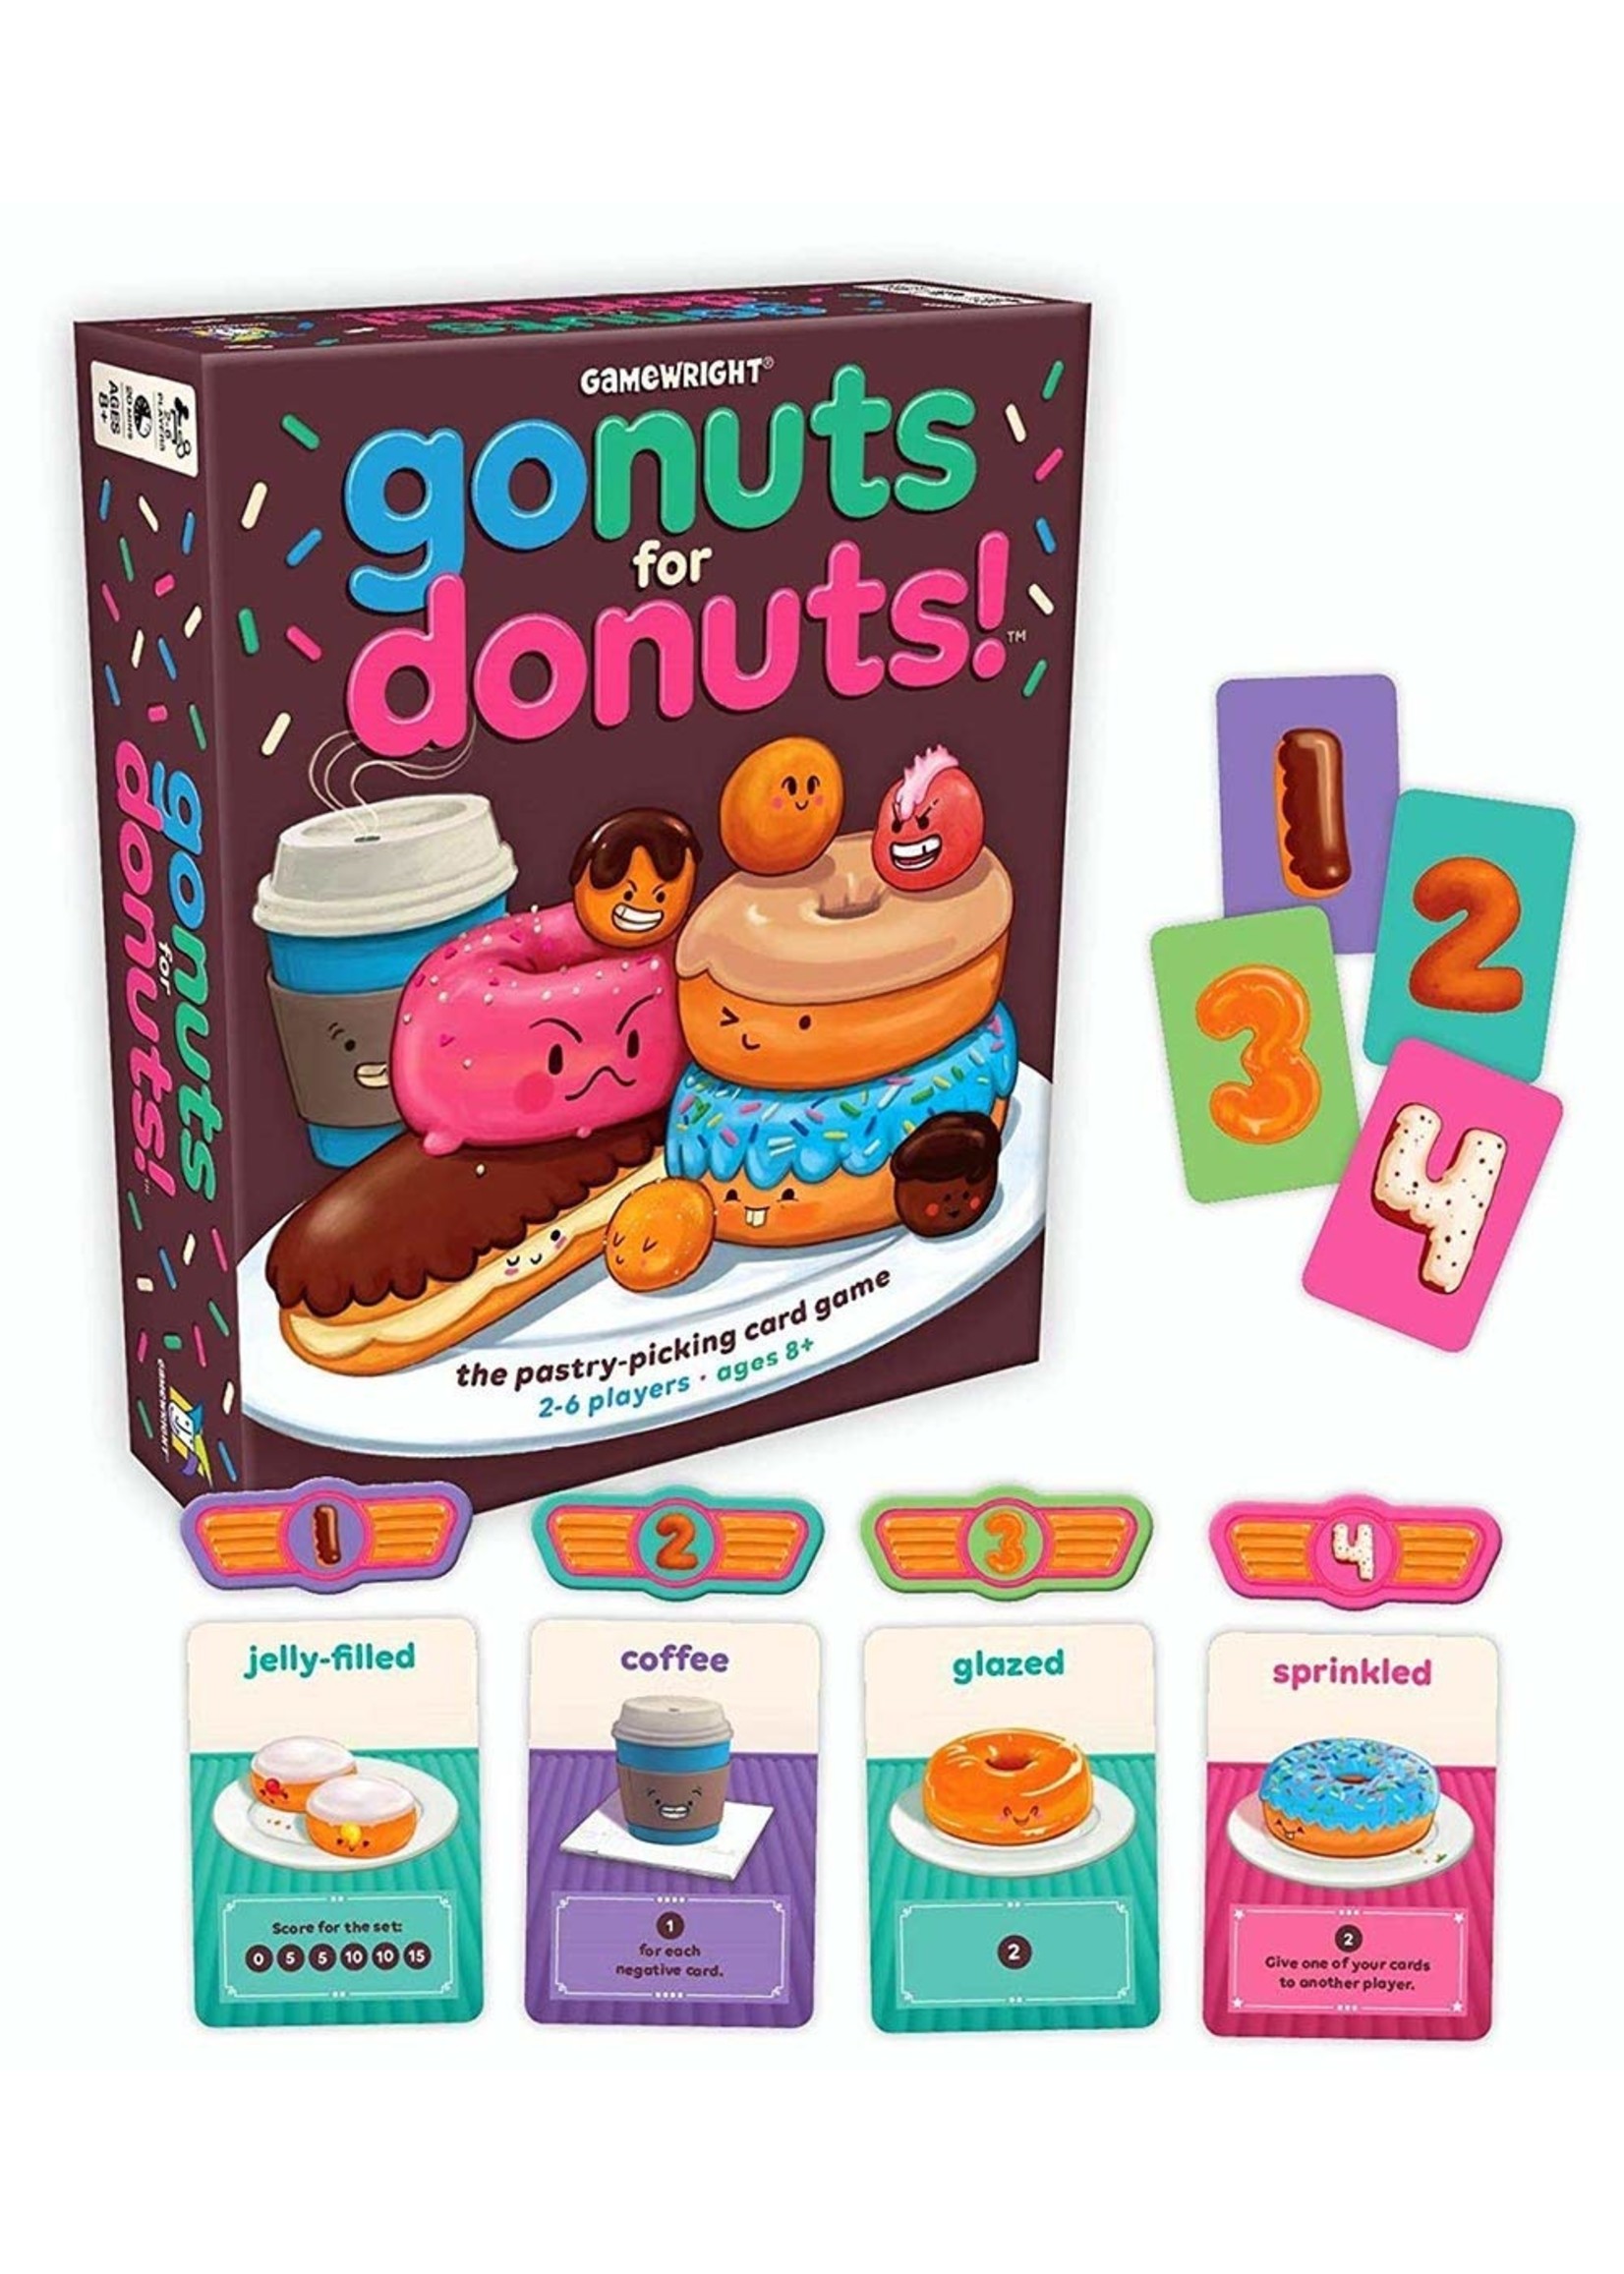 Gamewright Go Nuts For Donuts!